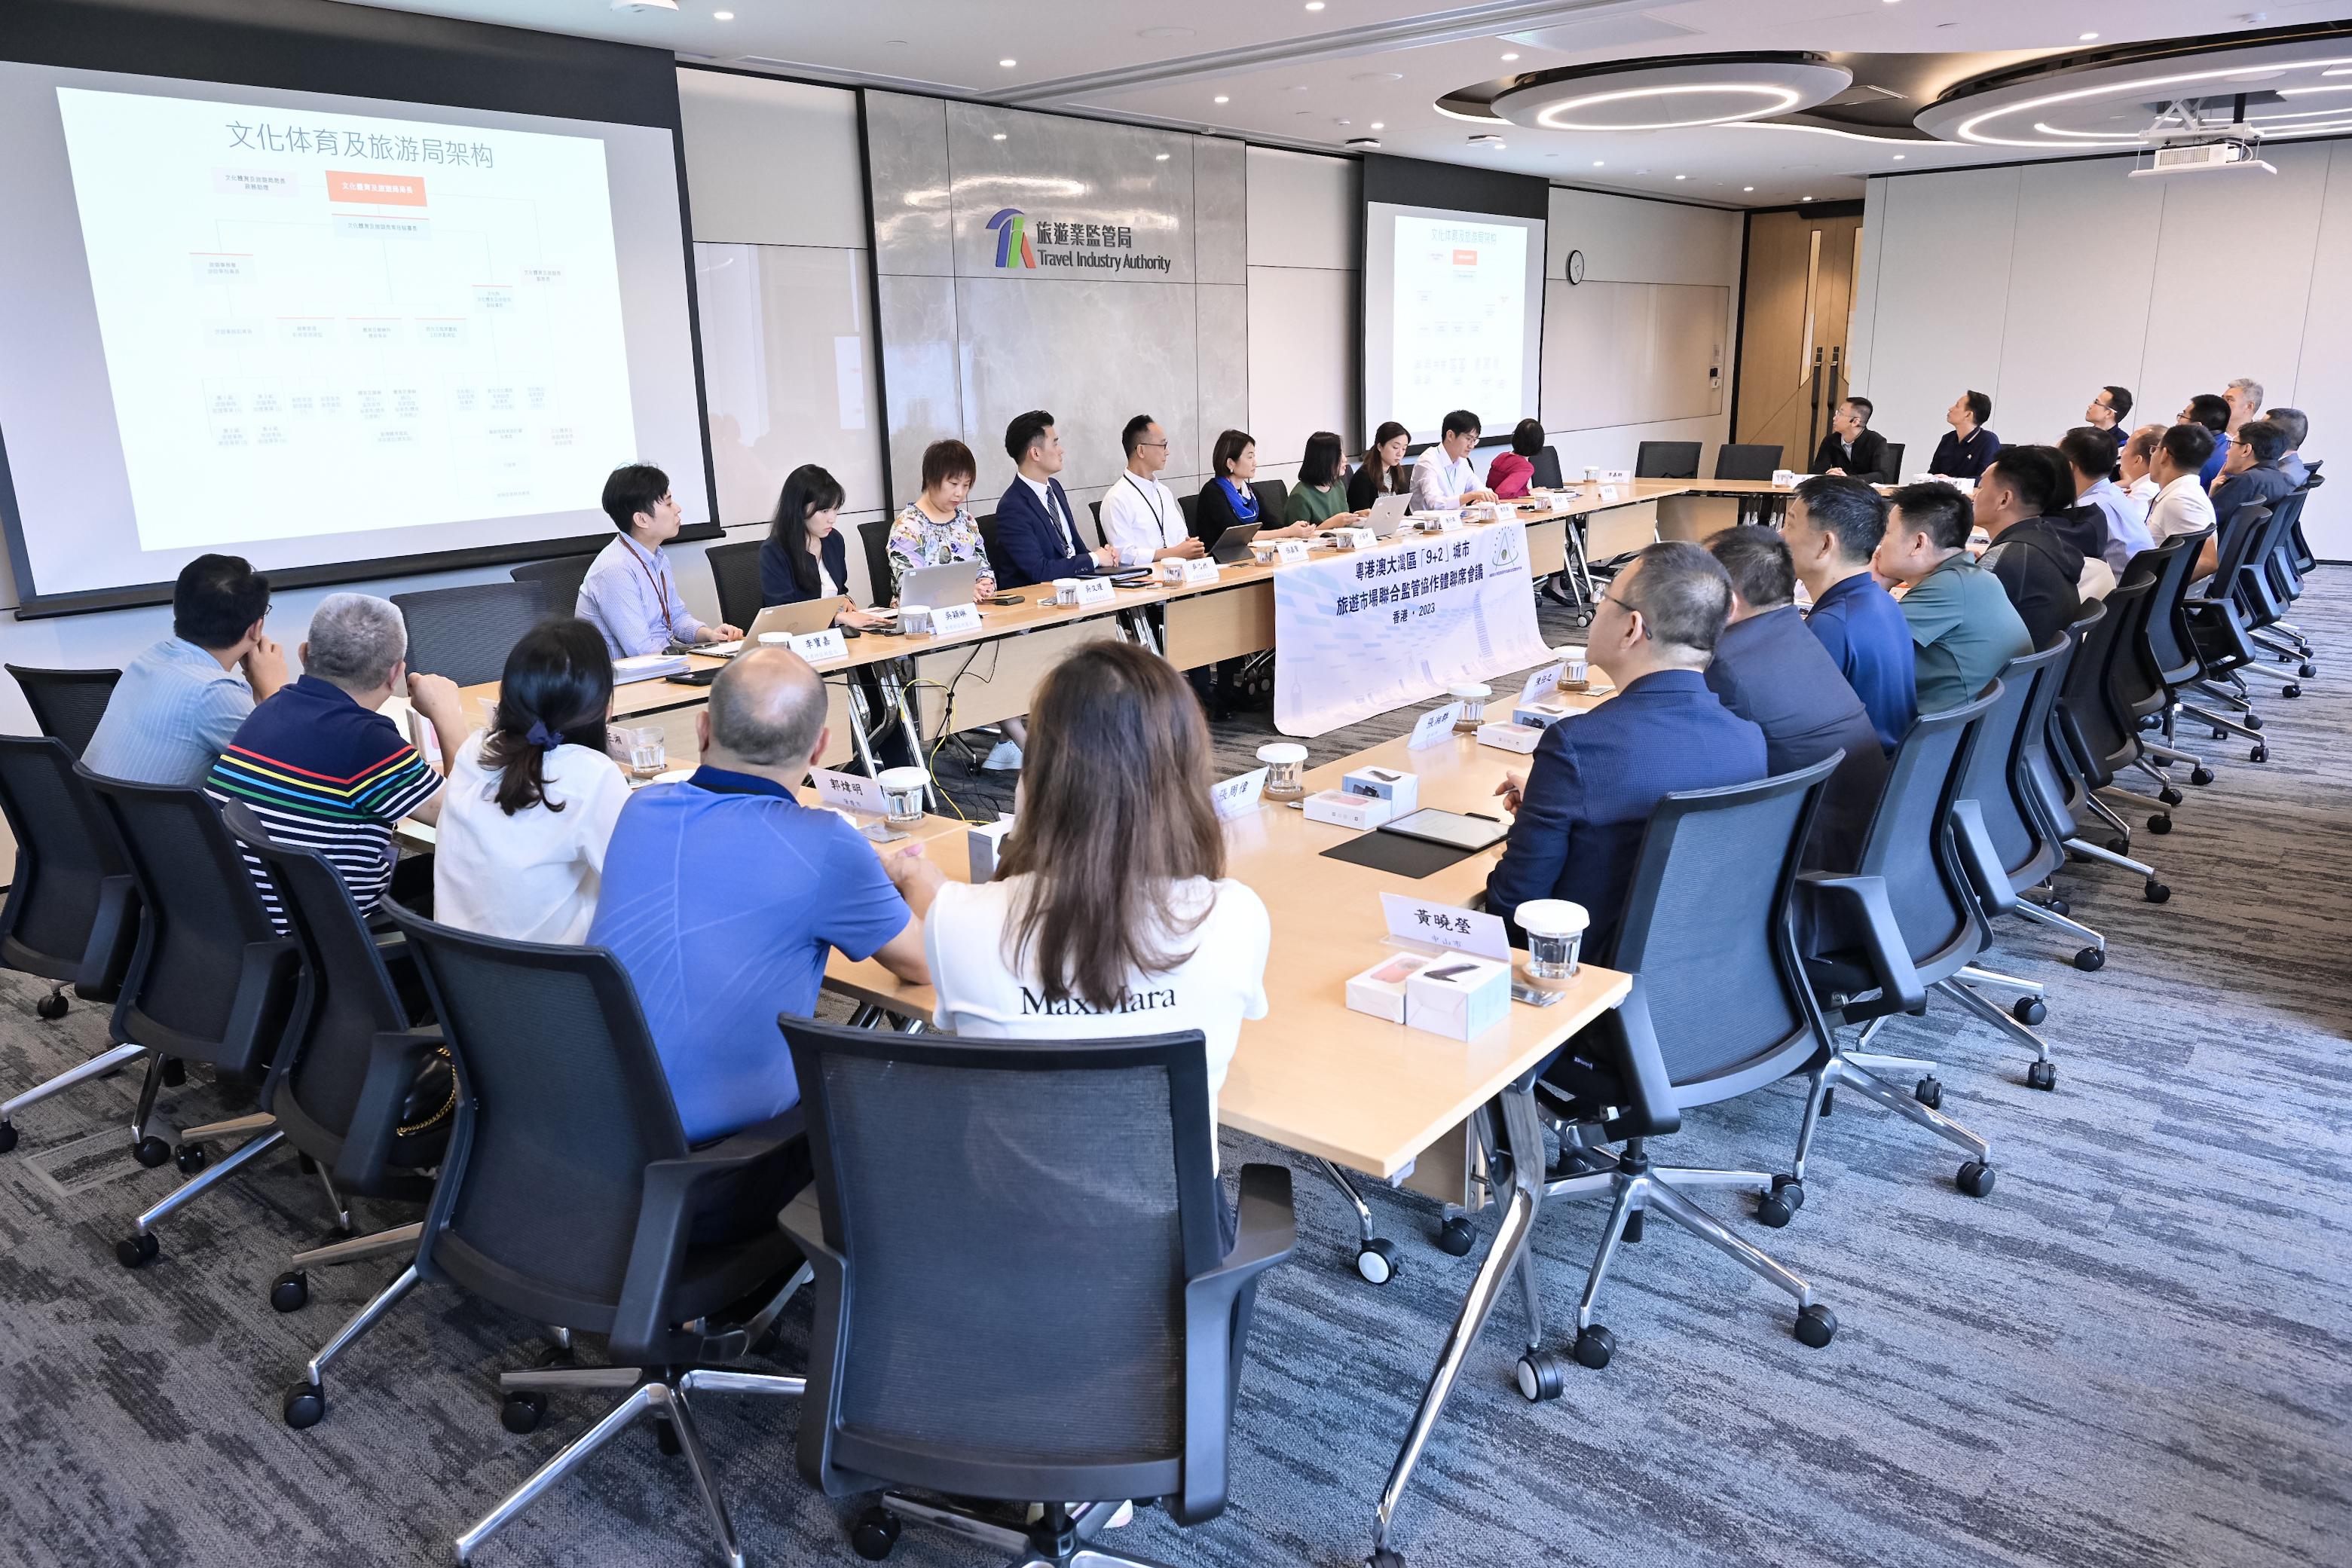 The exchange meetings of the Joint Regulatory Alliance of the Tourism Market of 9+2 Cities in the Guangdong-Hong Kong-Macao Greater Bay Area (JRA) were held for two days in Hong Kong. Photo shows the representatives of the JRA visiting the Travel Industry Authority yesterday (September 11).